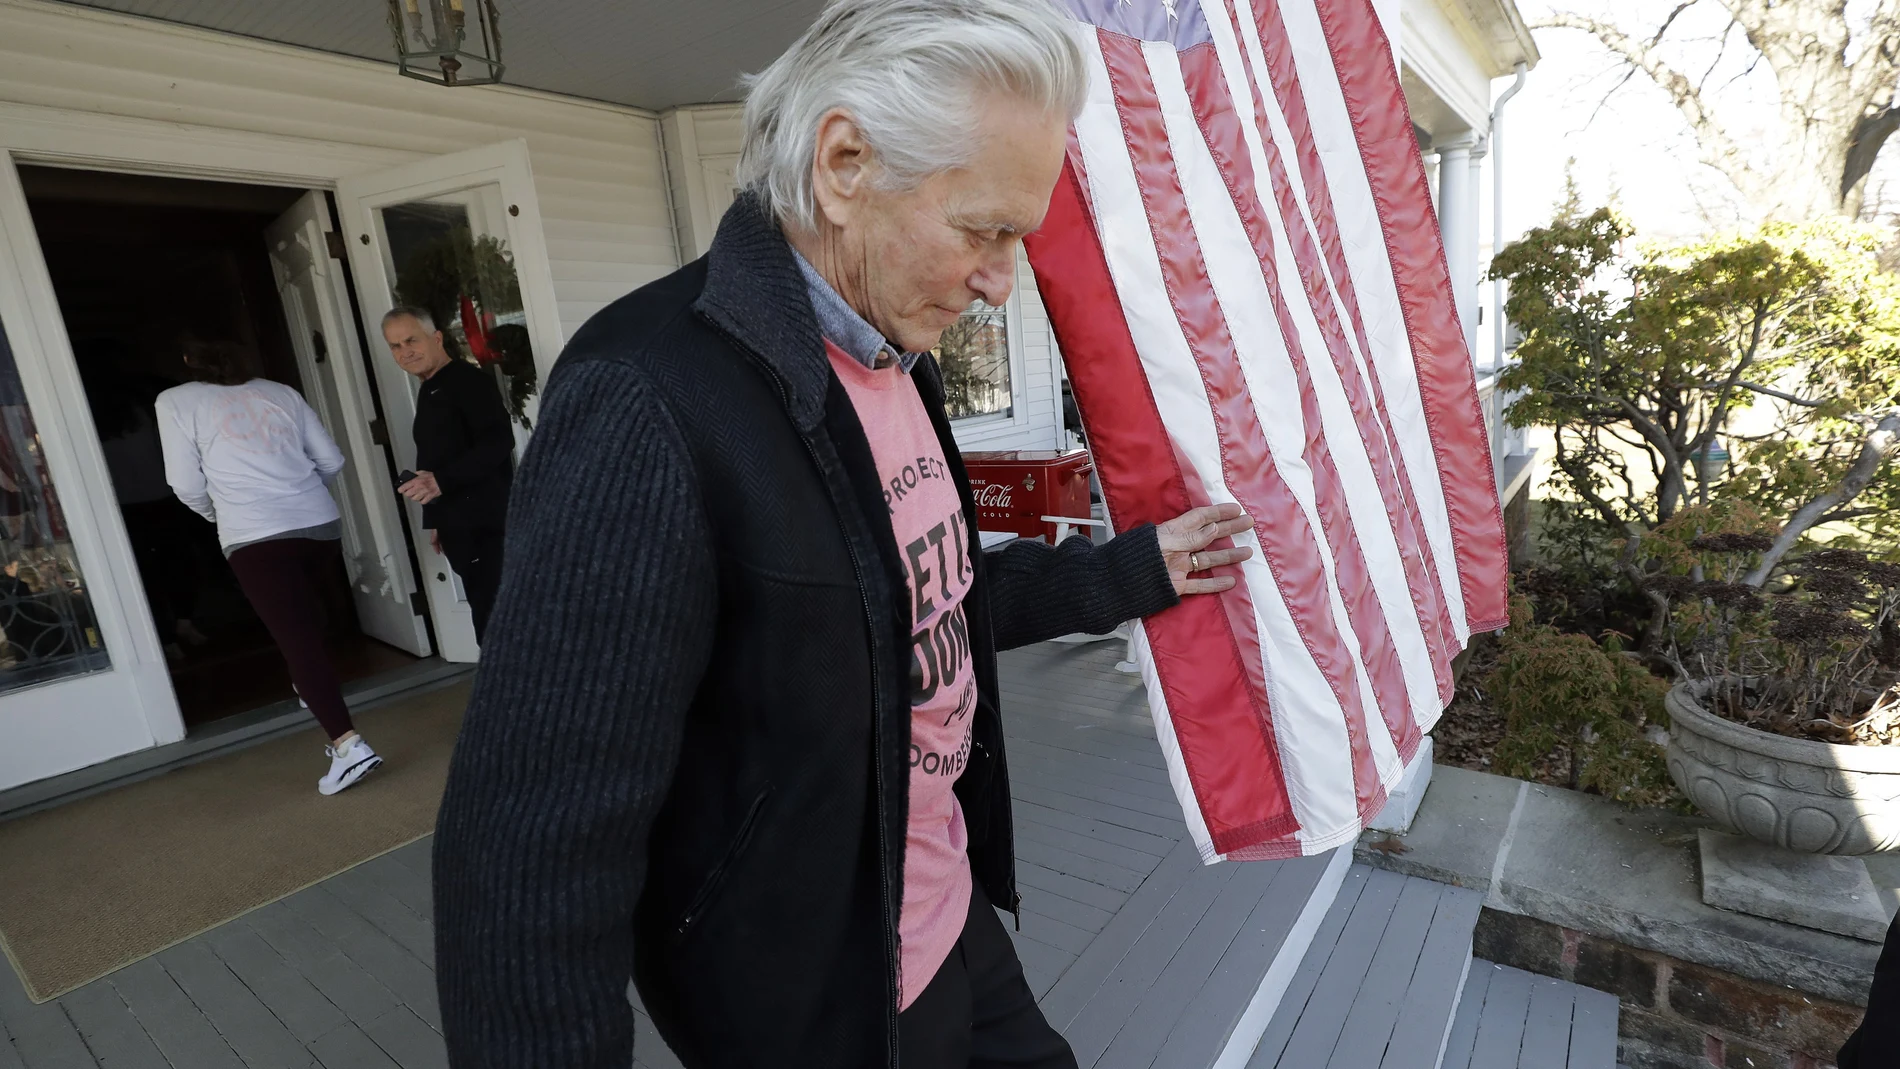 Actor Michael Douglas, front, steps off the front porch of Aileen Eleey, left, and her husband Peter Eleey's, second from left, home after canvasing for Democratic presidential candidate and former New York City Mayor Mike Bloomberg, not shown, Sunday, Feb. 23, 2020, in Quincy, Mass. (AP Photo/Steven Senne)